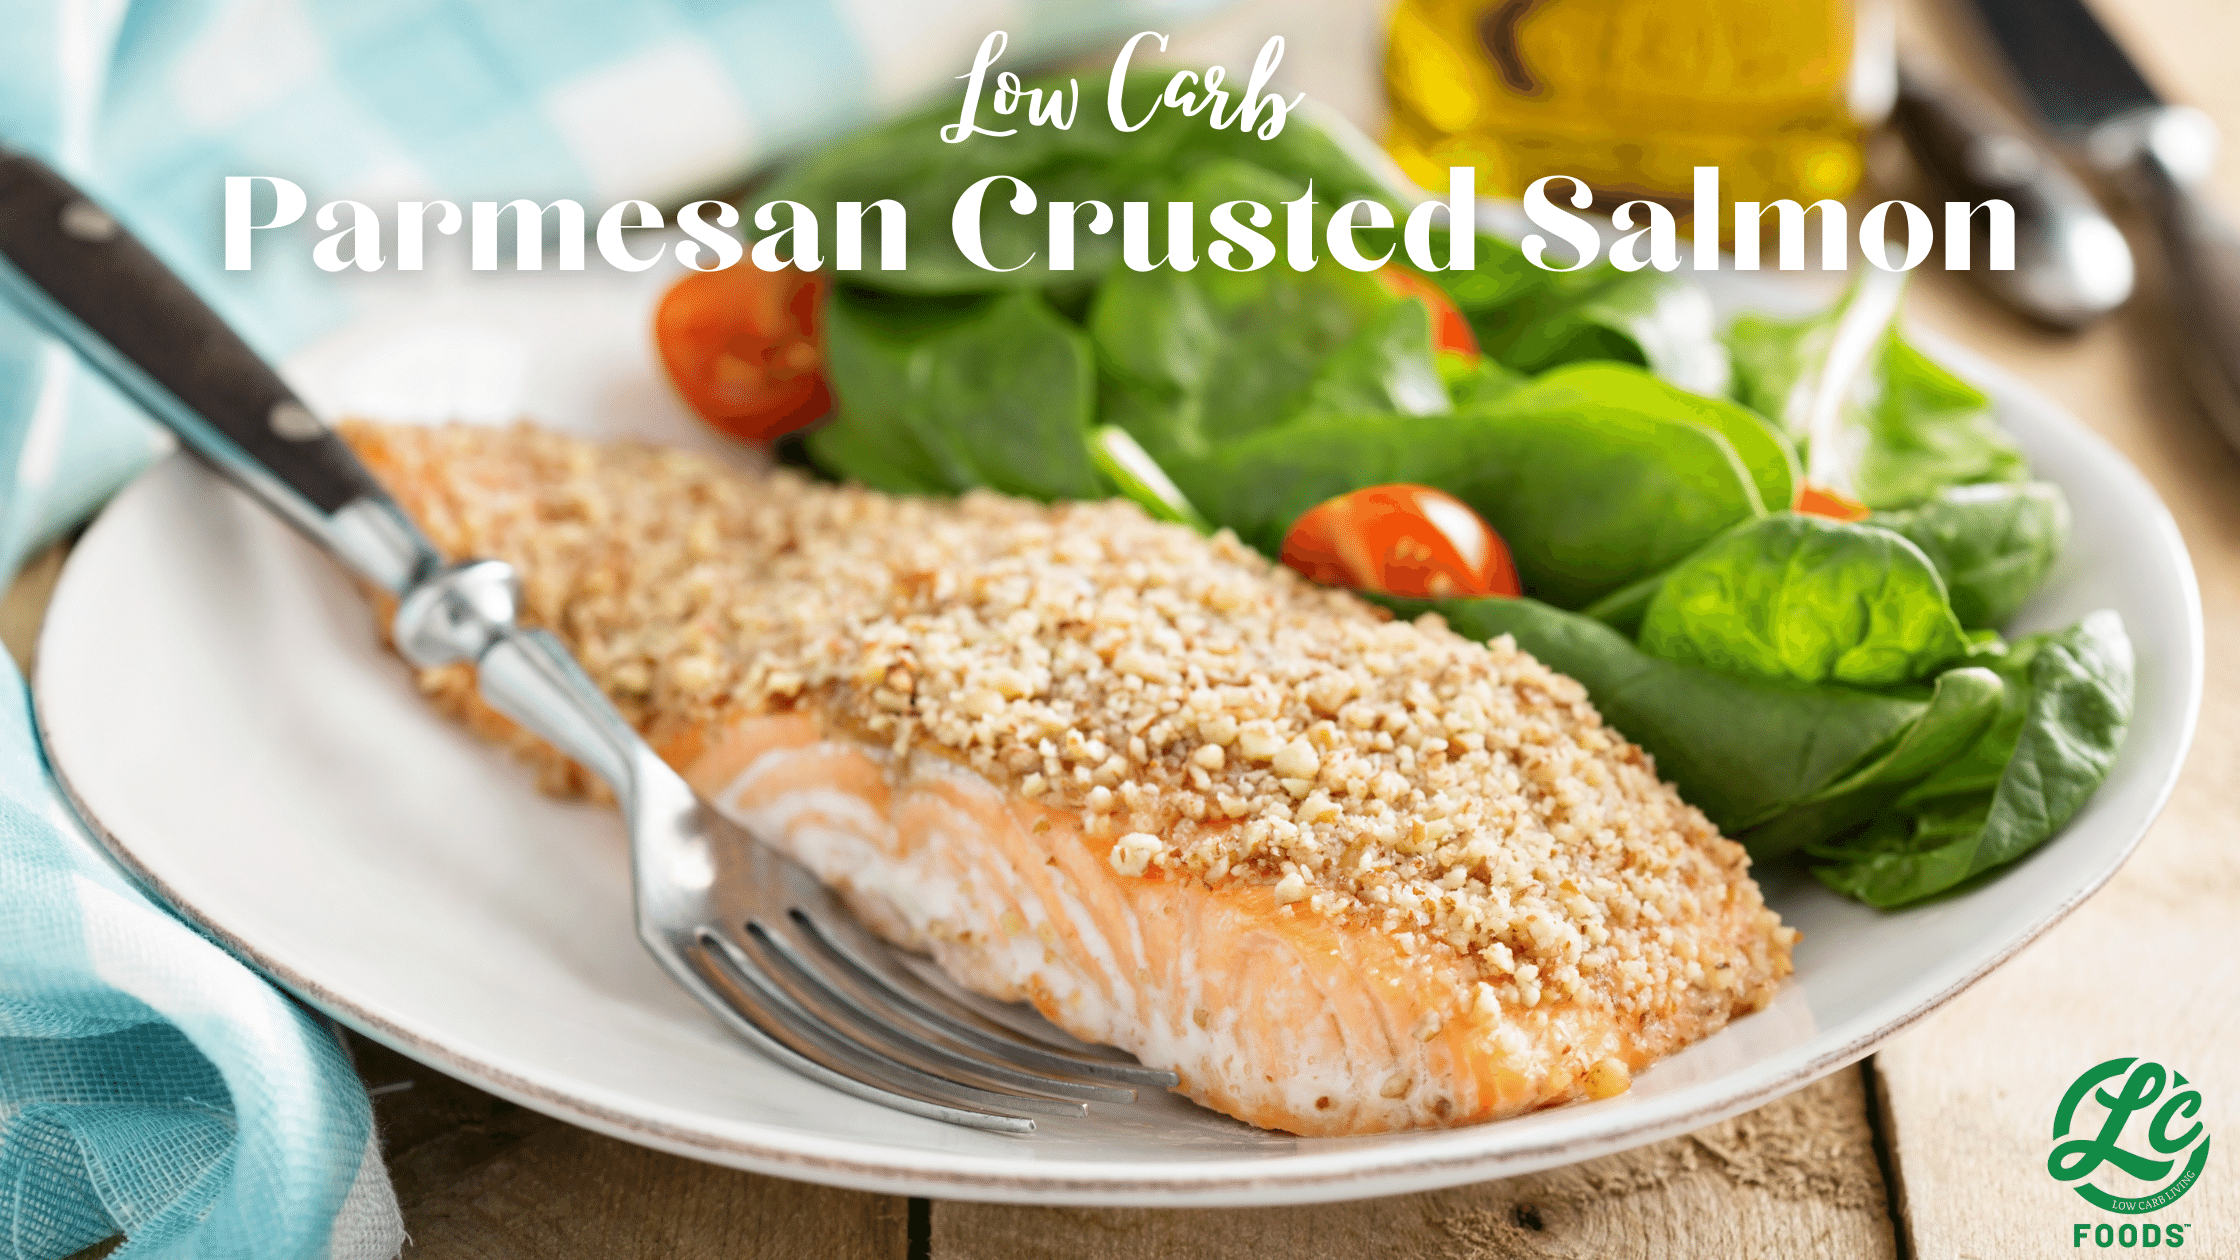 Thumbnail for Low Carb Parmesan Crusted Salmon